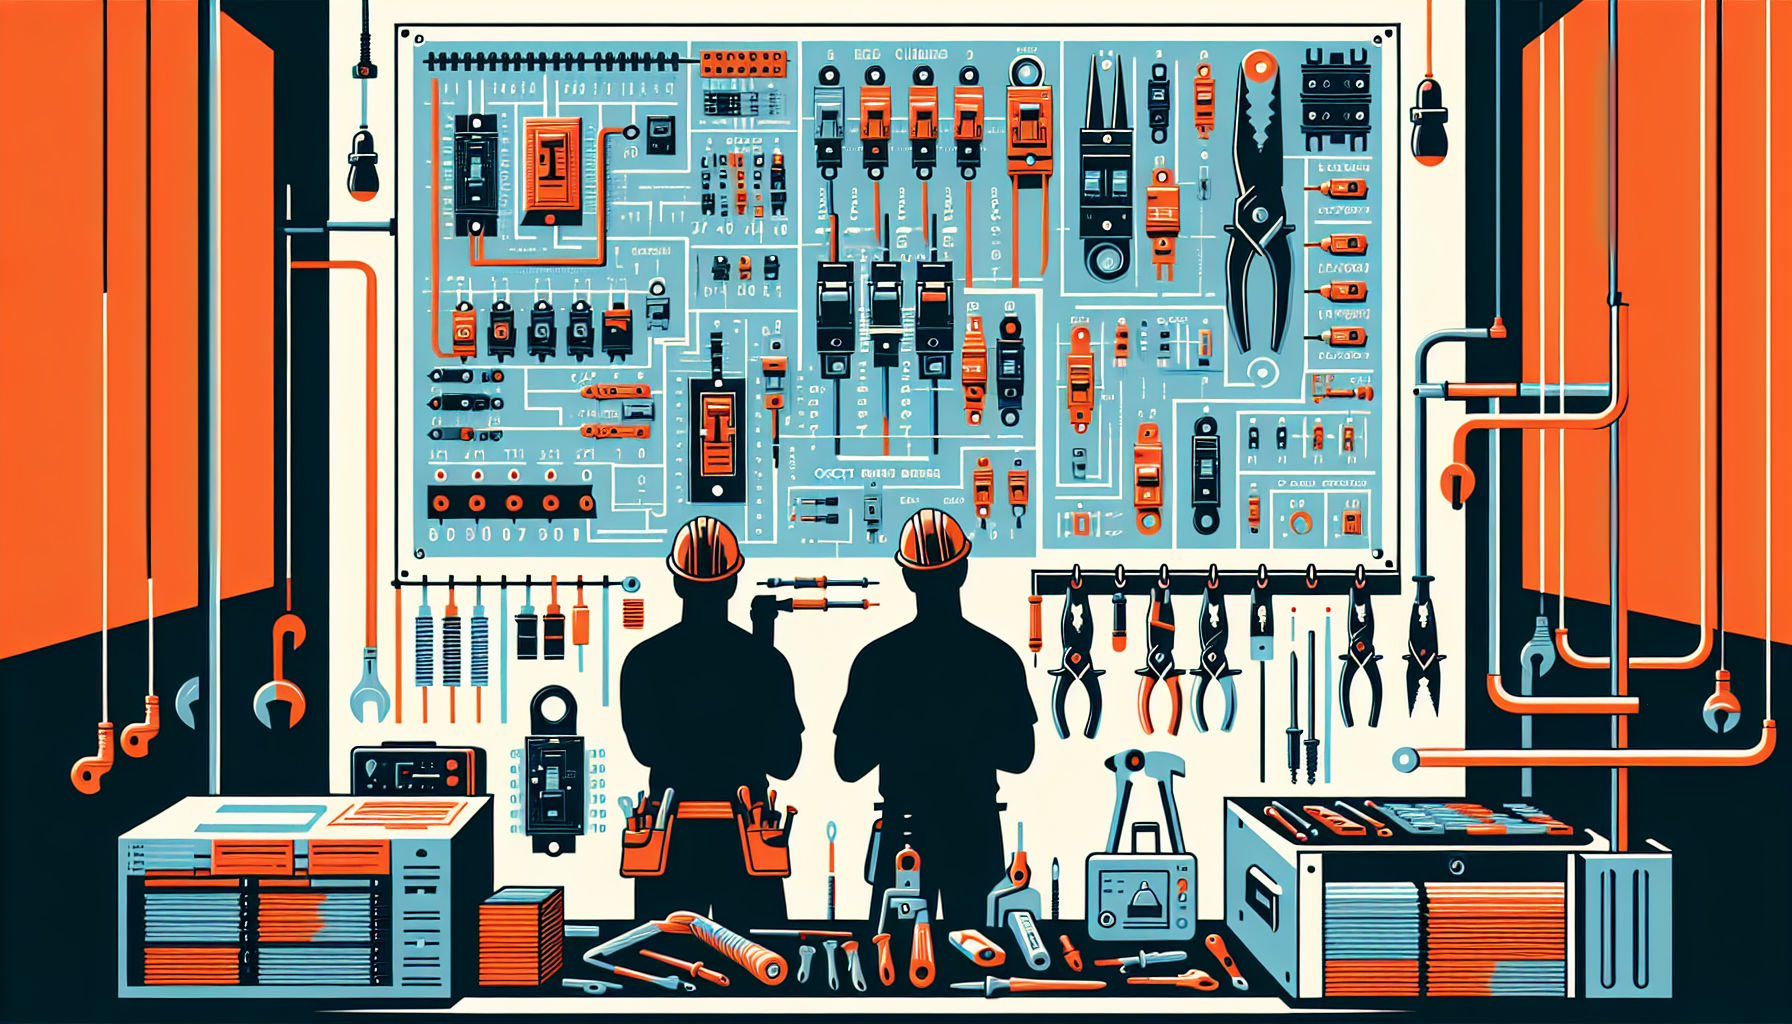 Electrician's workspace illustration focused on circuit breaker sizing guide